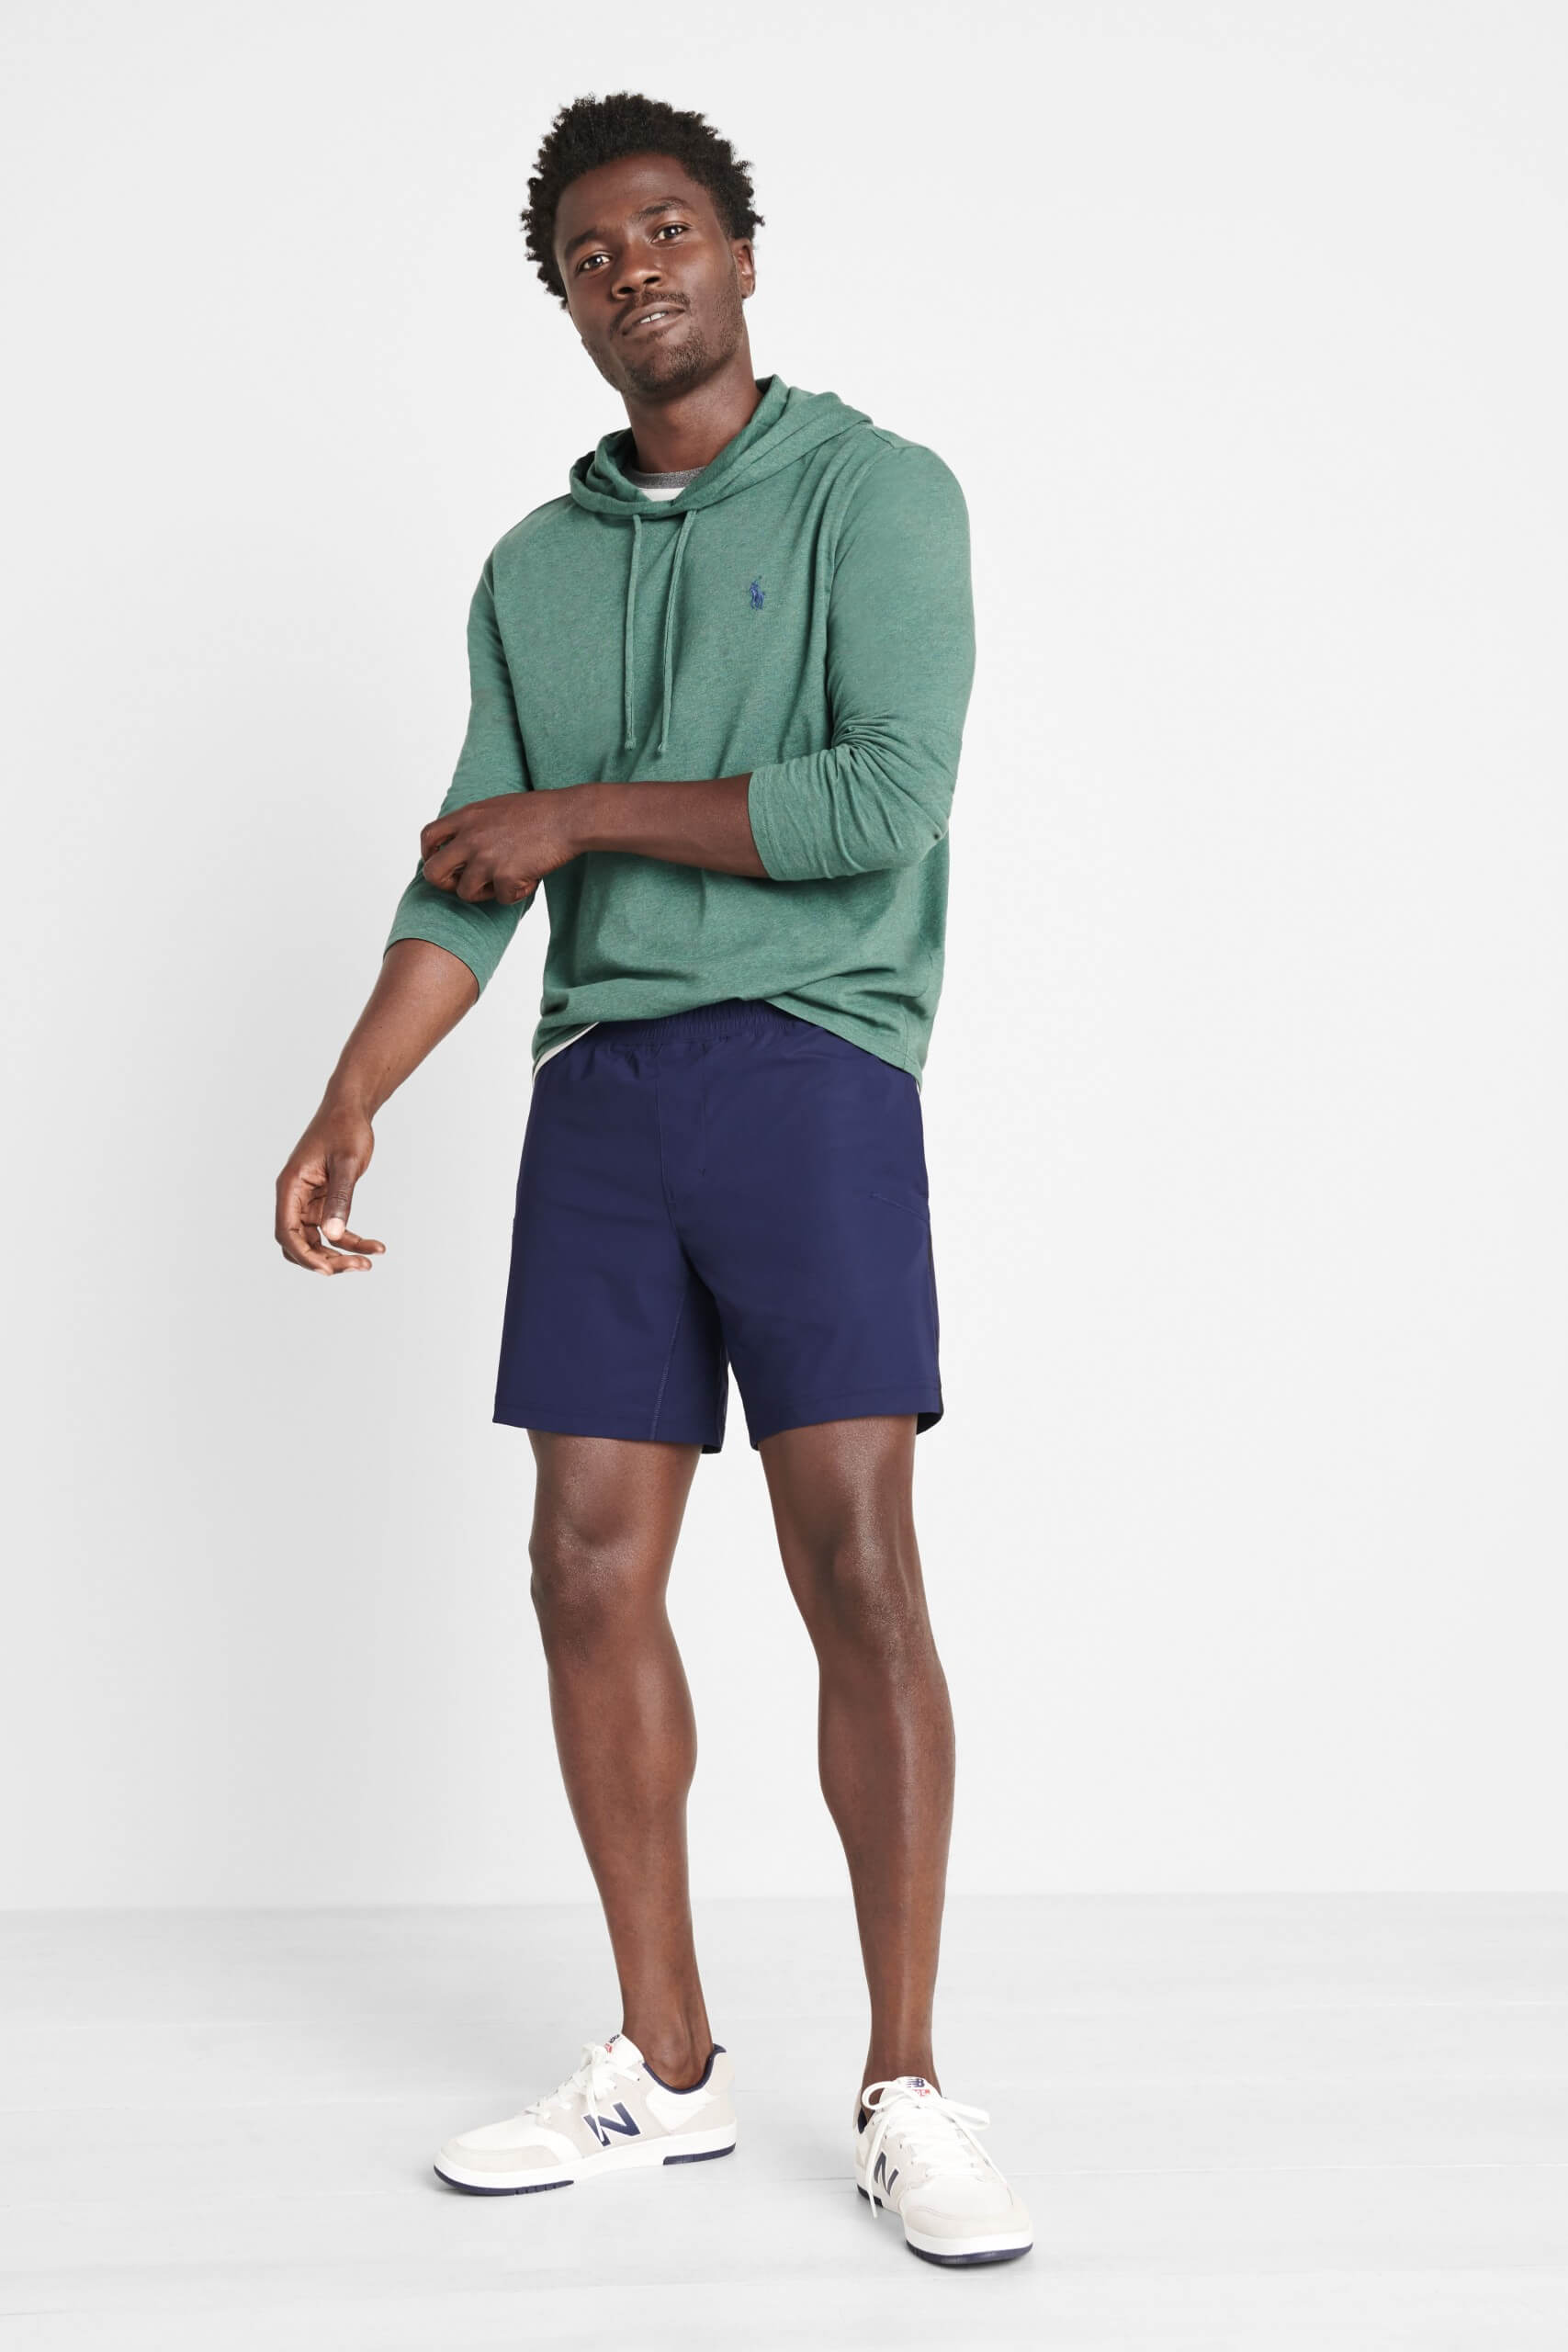 Style Advice For Guys That Have A Long Body / Short Legs 